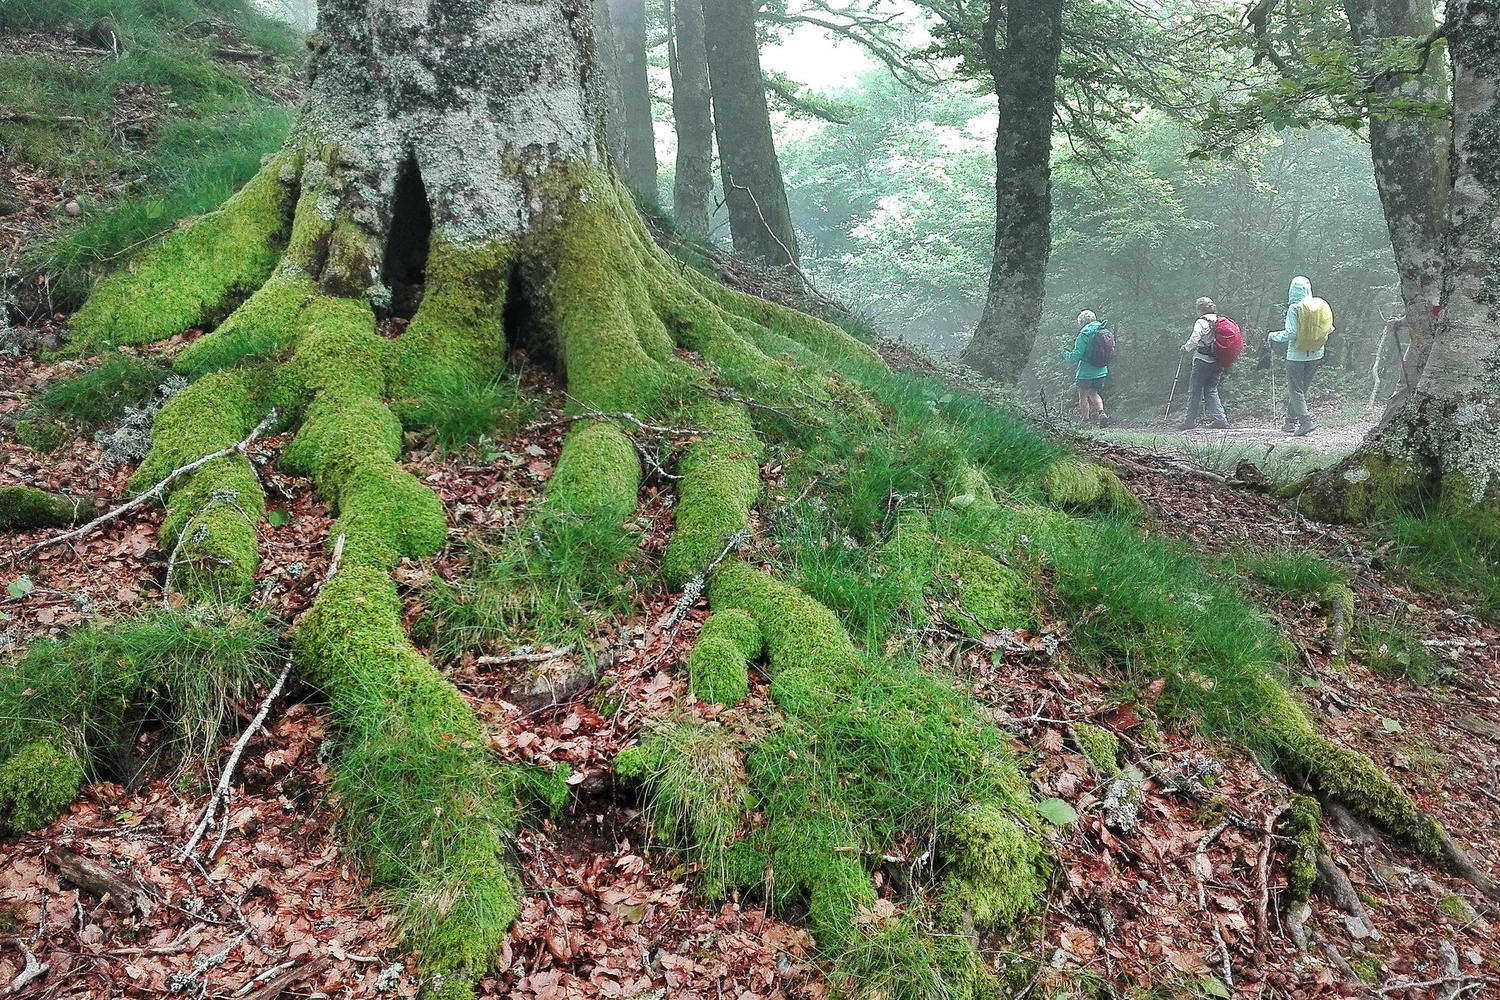 spain-navarre-camino-roncesvalles-beech-forest-hikers